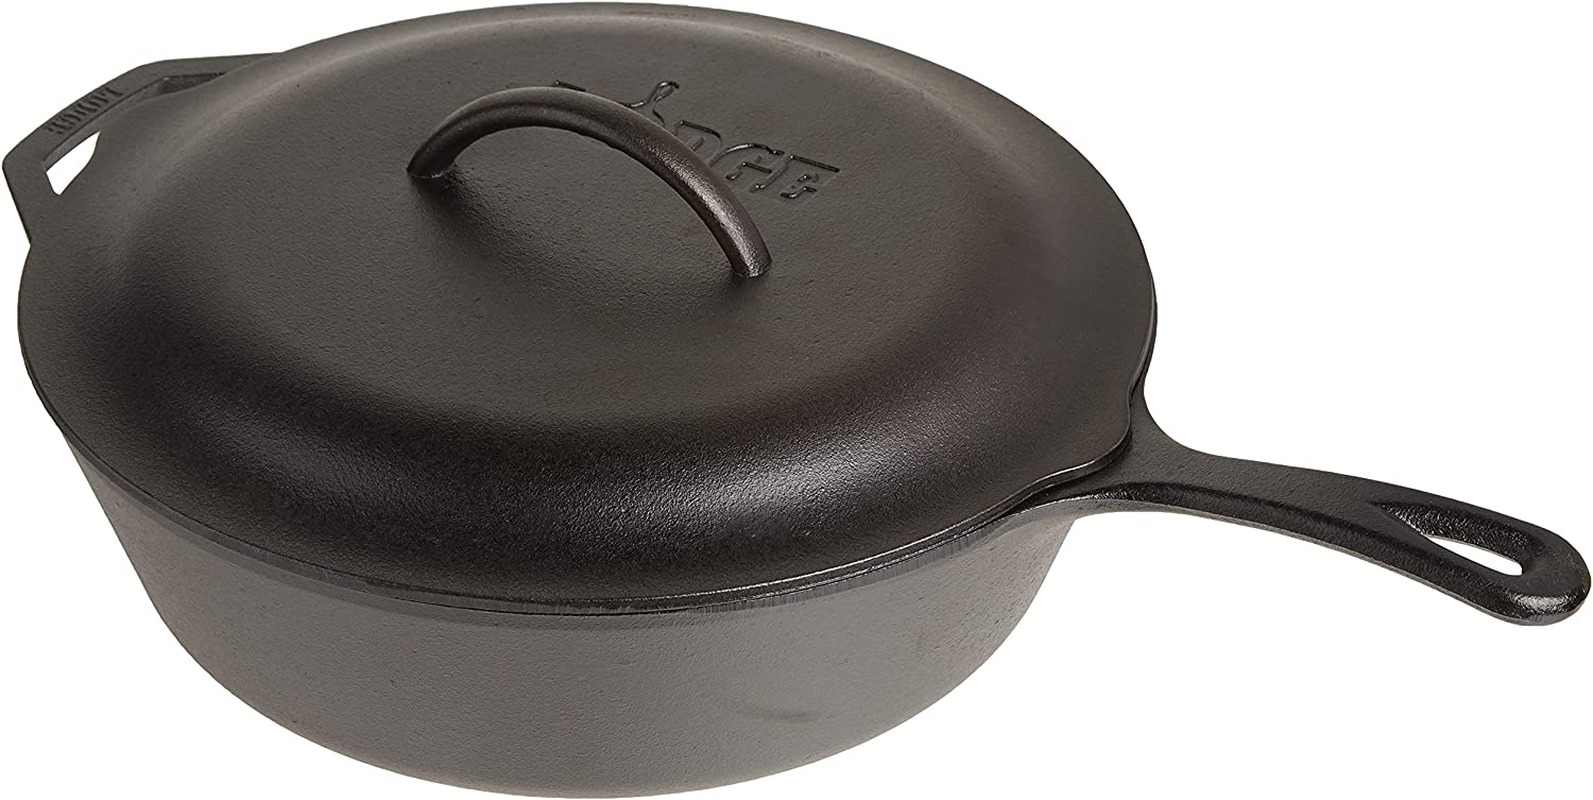 Lodge Pre-Seasoned Cast Deep Skillet with Iron Cover and Assist Handle, 5 Quart,